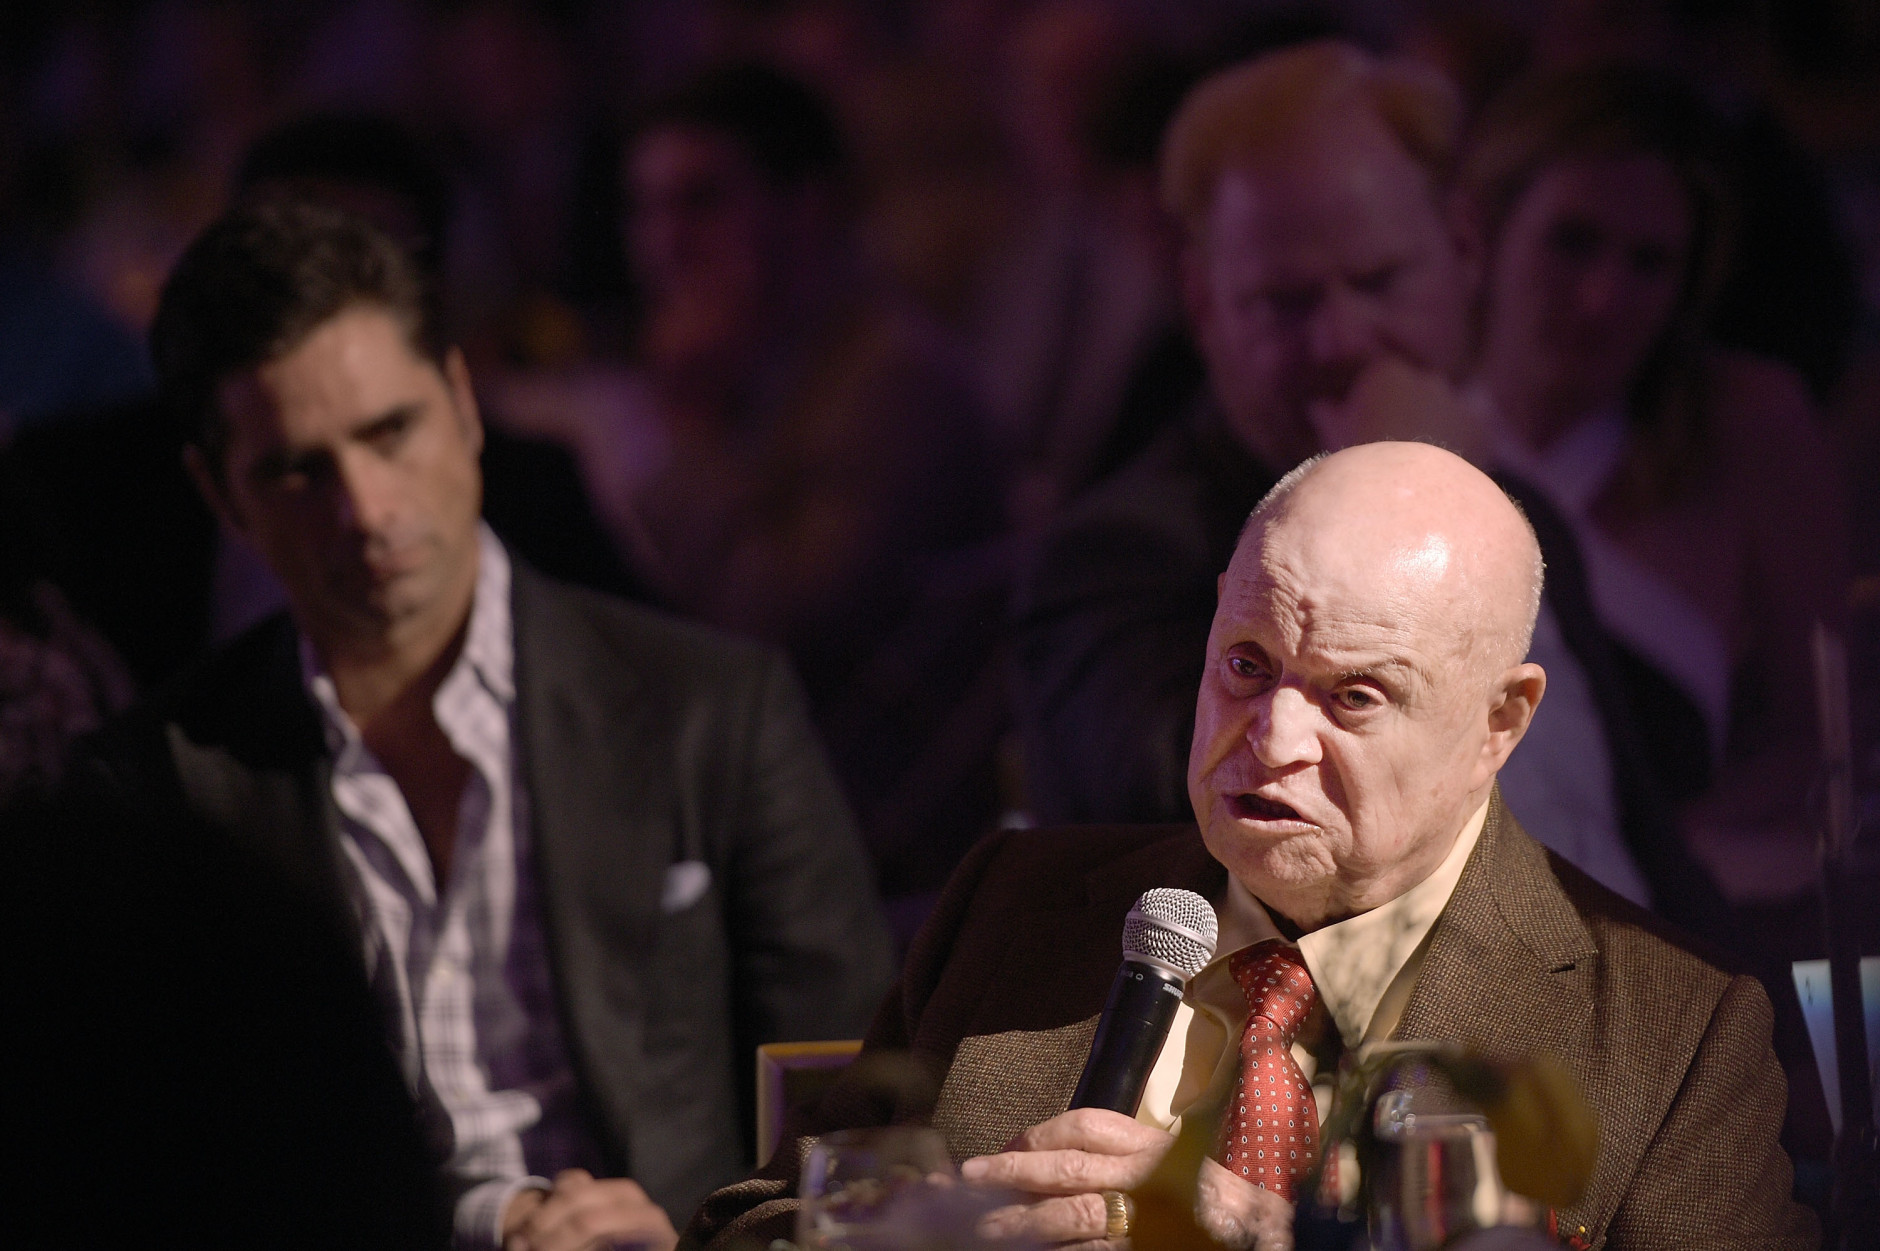 Comedian Don Rickles turns 90 on May 8. In this photo, actor John Stamos and Rickles attend the "Cool Comedy - Hot Cuisine" To Benefit The Scleroderma Research Foundation benefit at the Beverly Wilshire Four Seasons Hotel on June 5, 2015 in Beverly Hills, California.  (Photo by Jason Kempin/Getty Images)